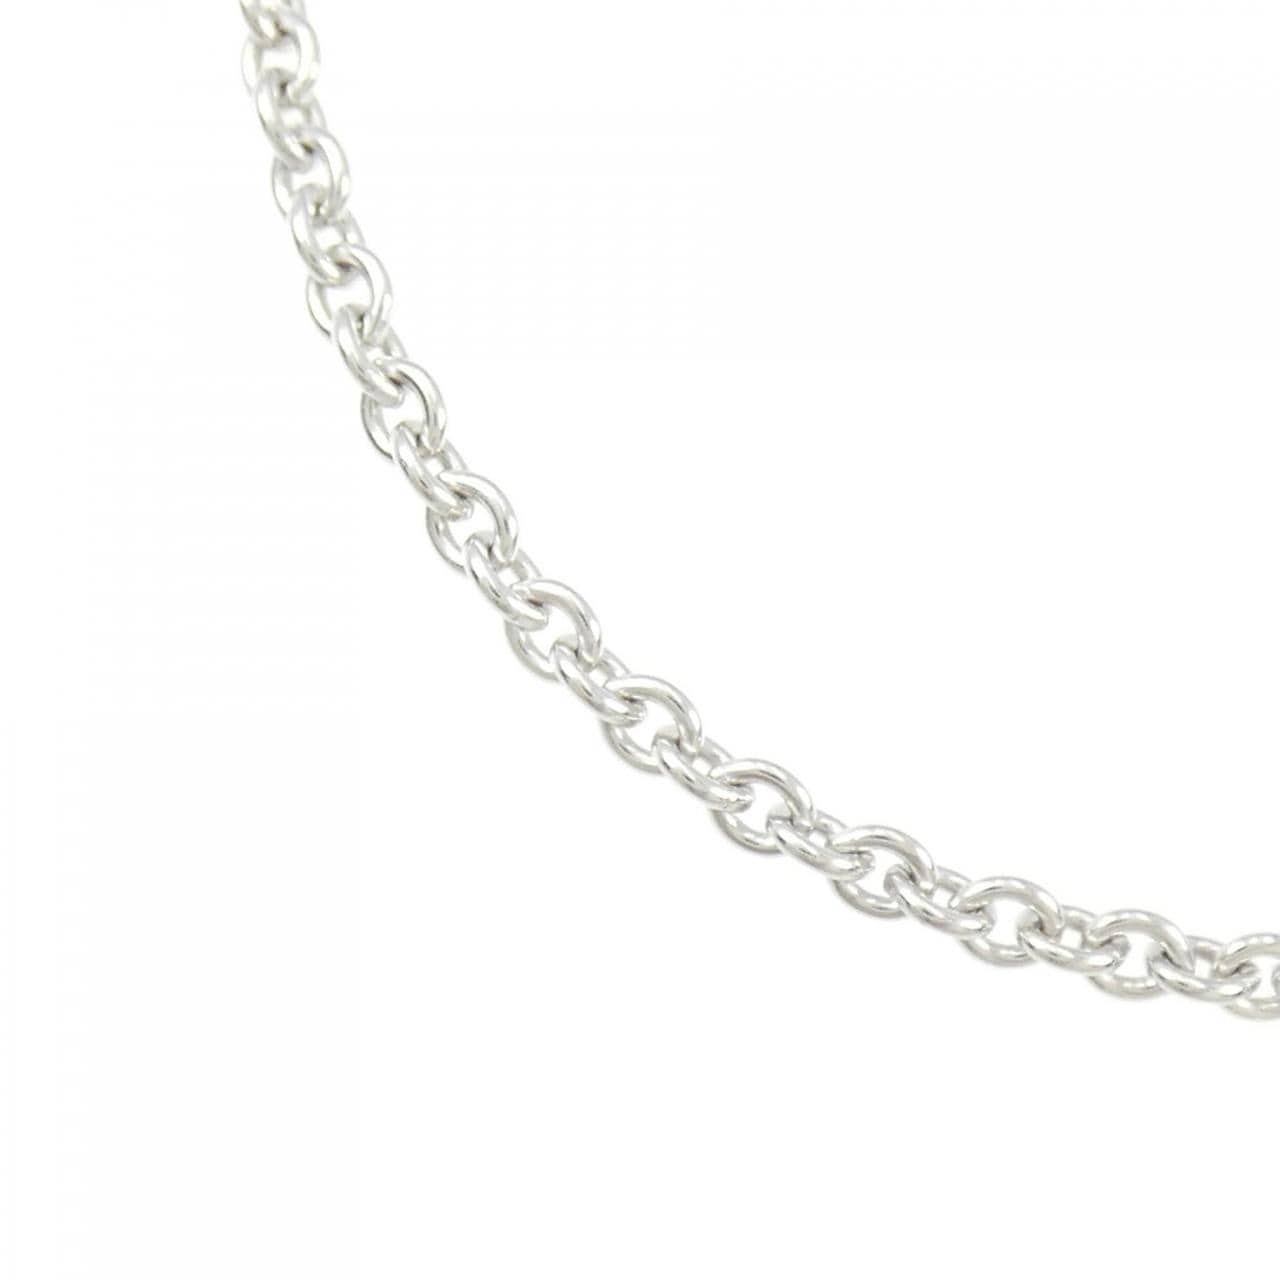 Cartier Forsa chain necklace